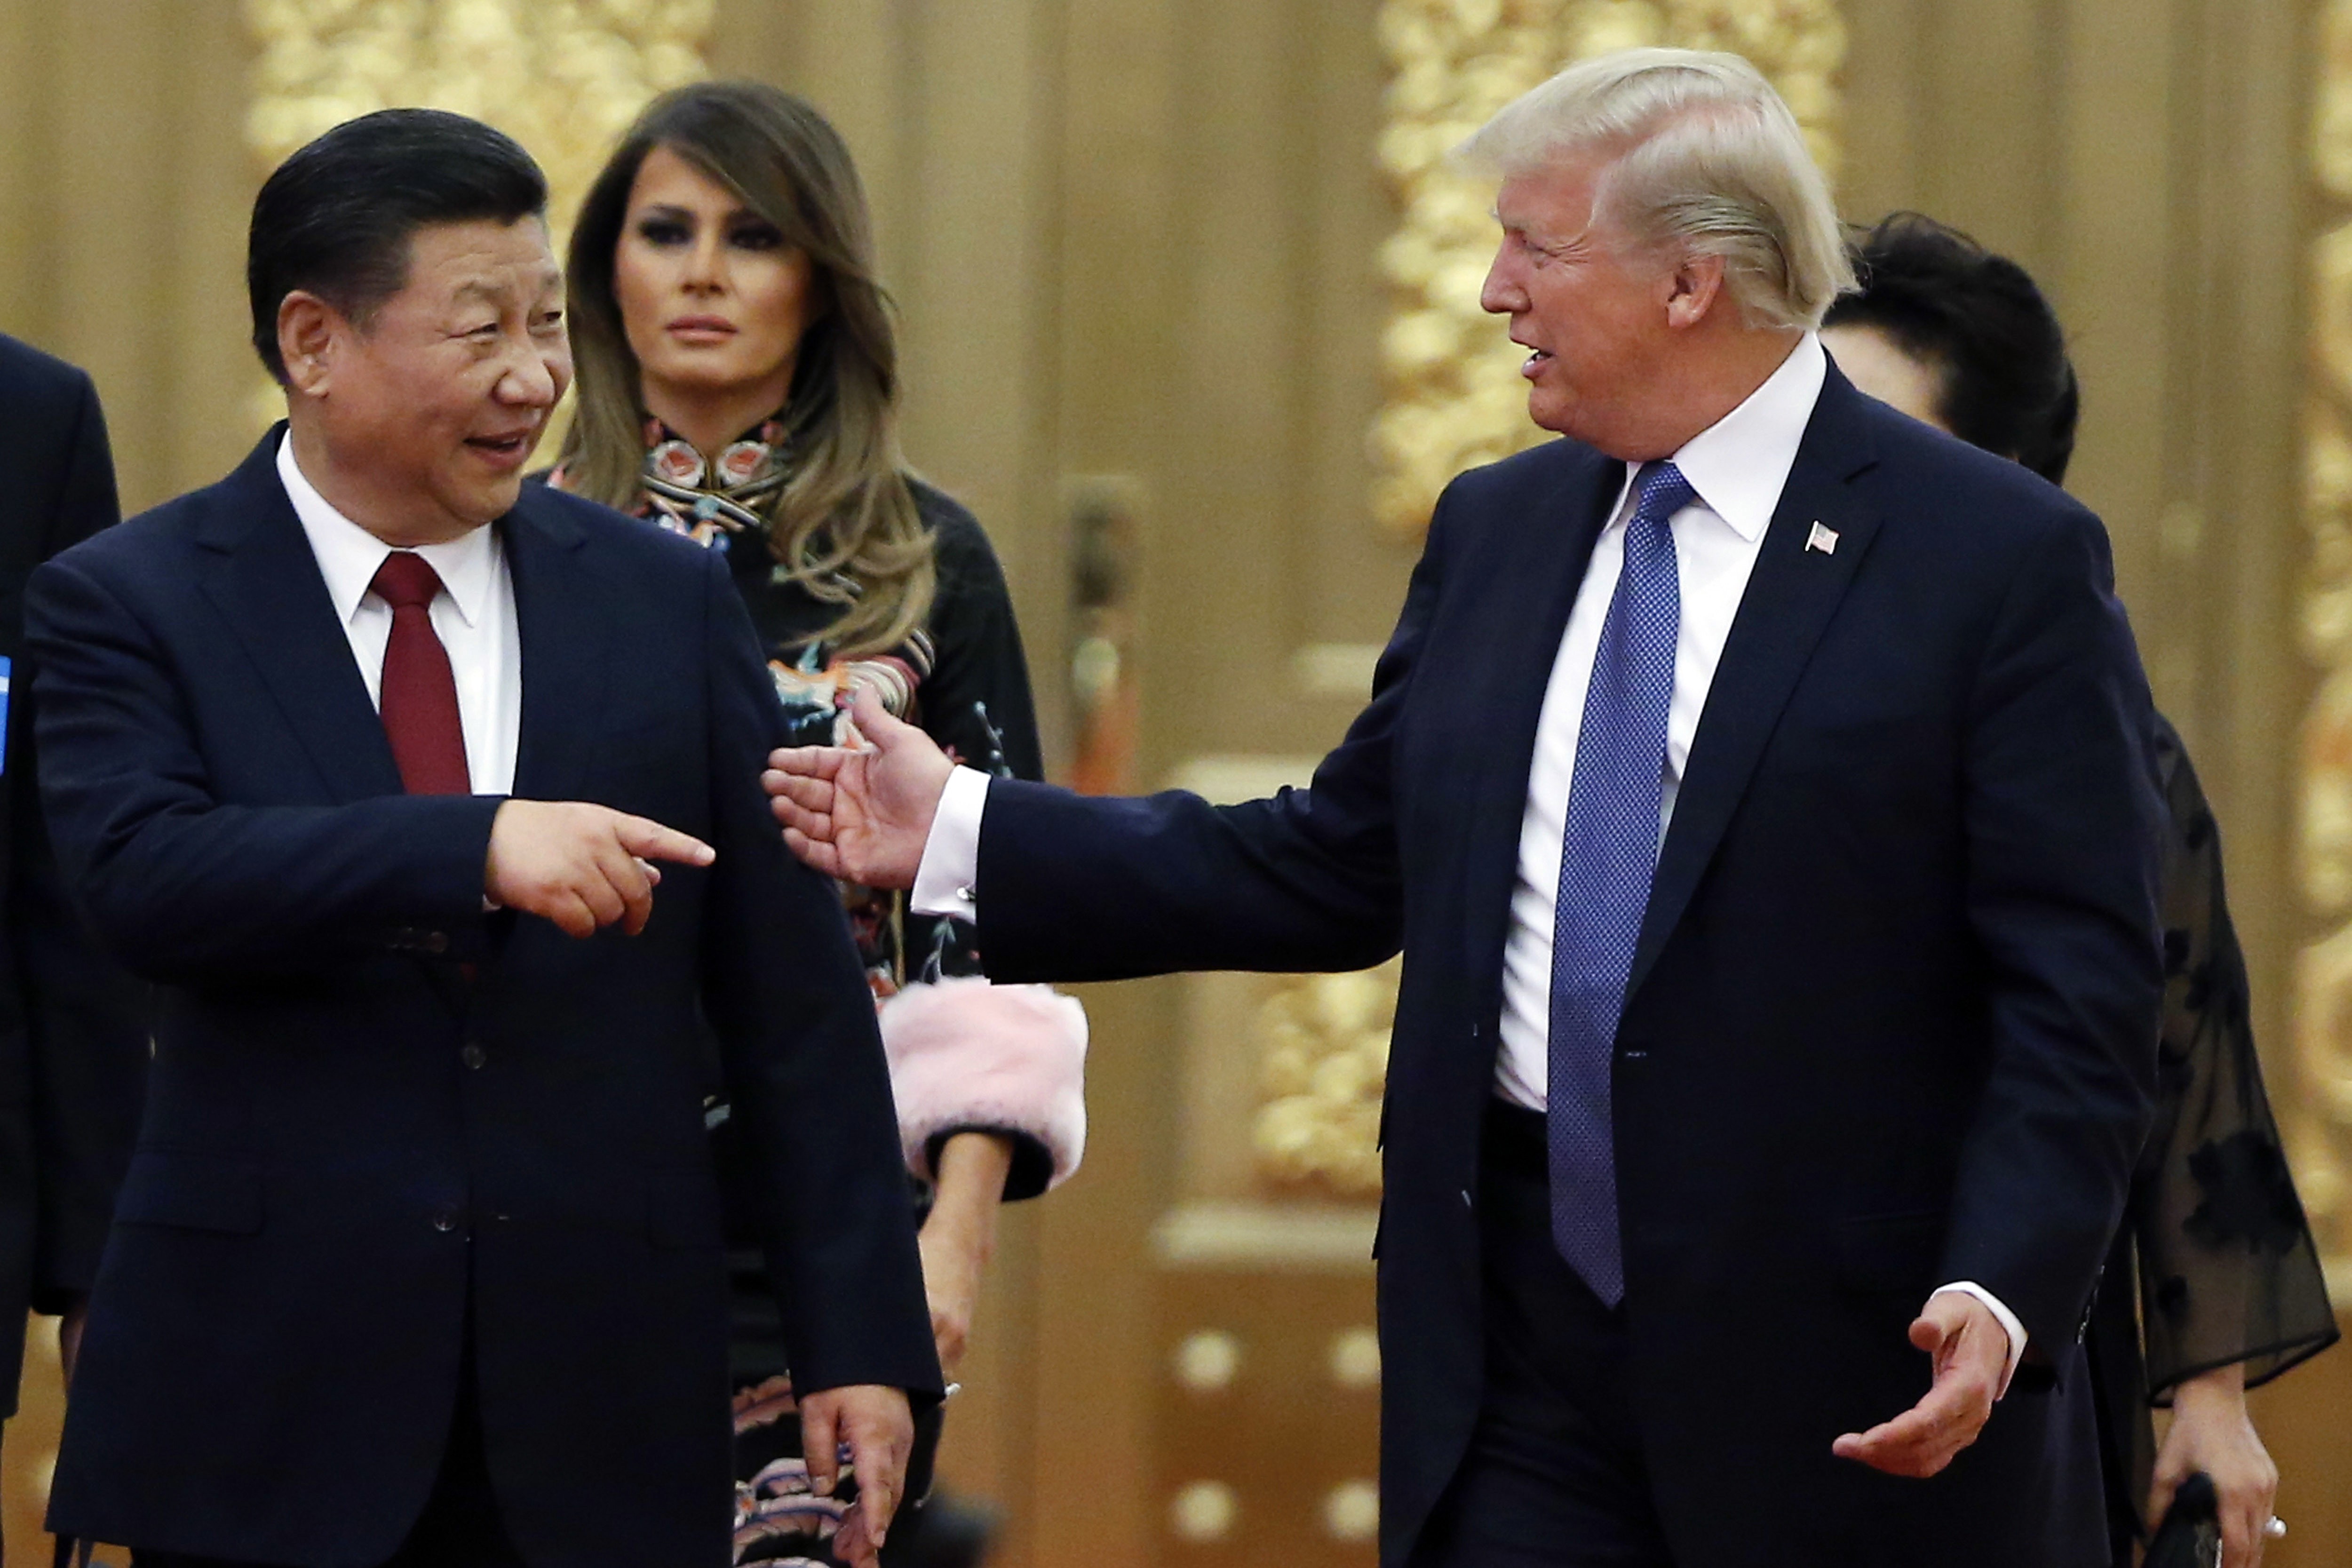 US President Donald Trump and China's President Xi Jinping arrive for the state dinner at the Great Hall of the People in Beijing on November 9, 2017. Photo: AP